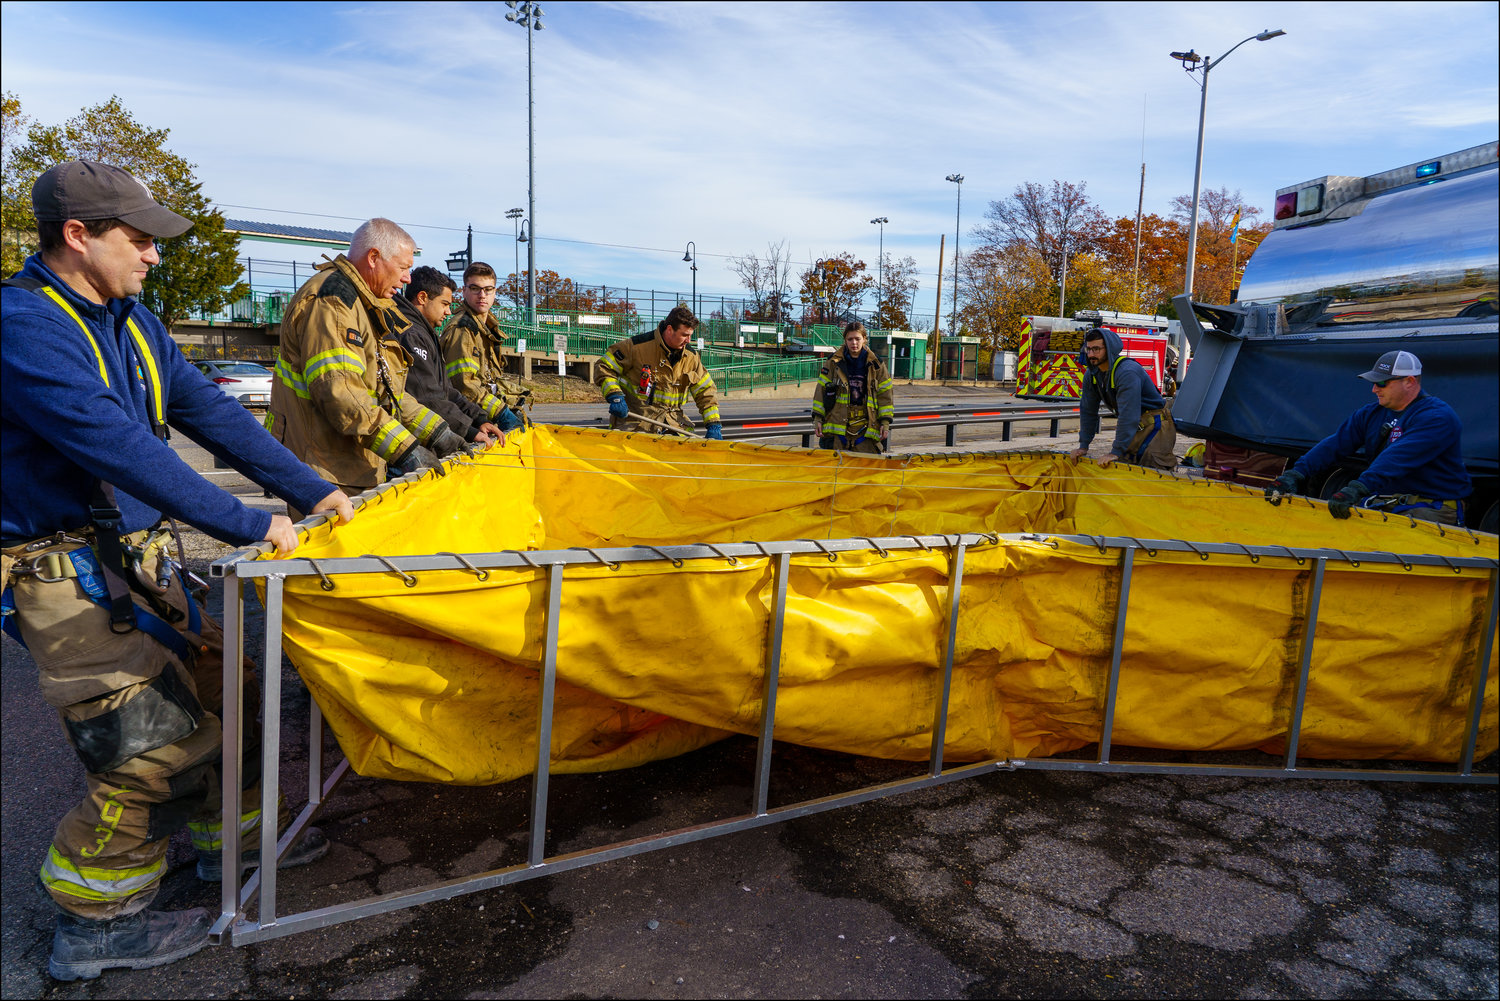 At a fire, a collapsible pool will be opened on level ground by firefighters in preparation for the water that will be dumped into it from a tanker truck.